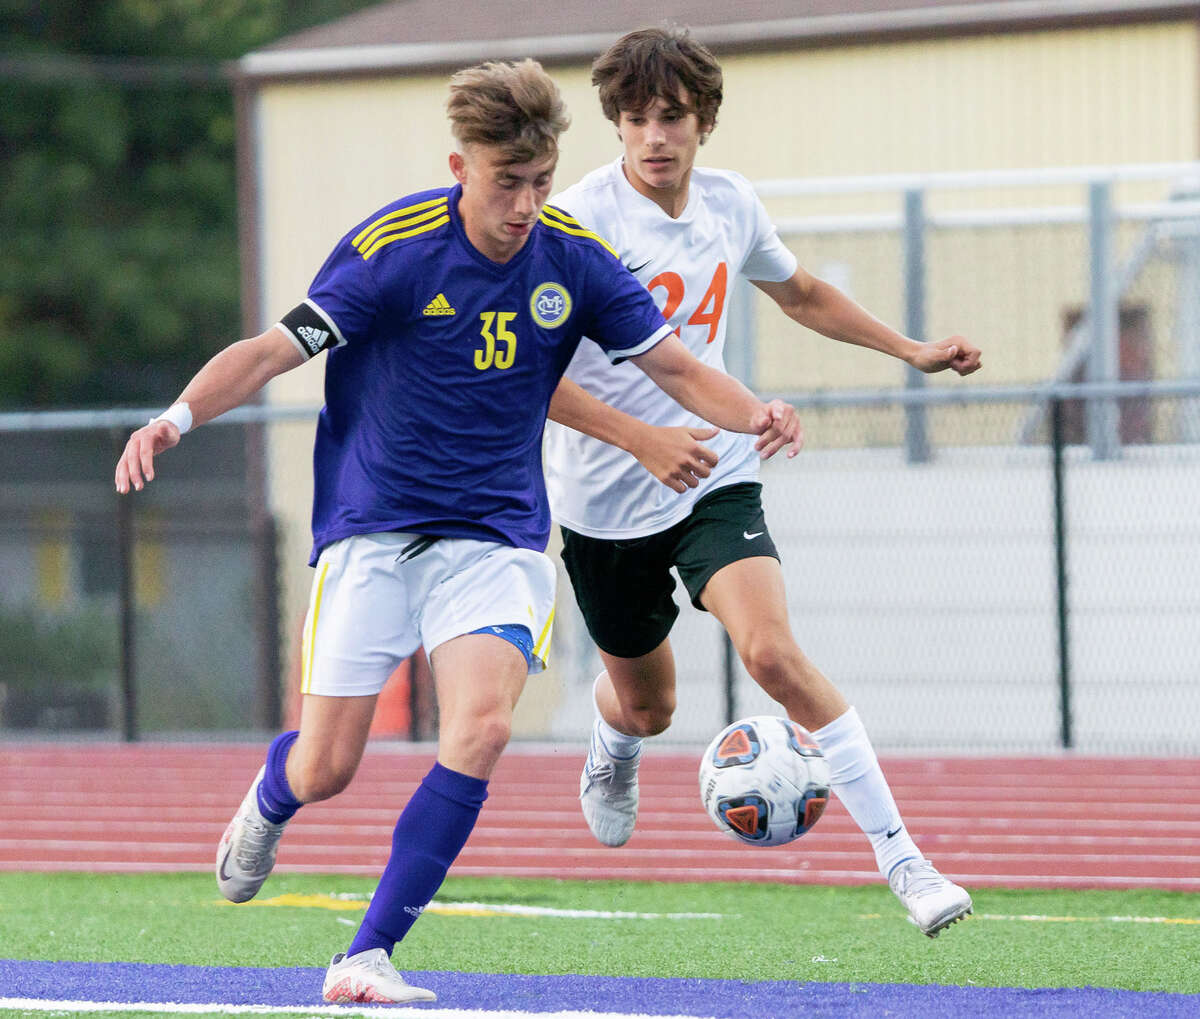 Bryce Harris of CM, left, and Waterloo's Patrick Nobbe battle for the ball in a Mississippi Valley Conference game earlier this season at Hauser Field in Bethalto.